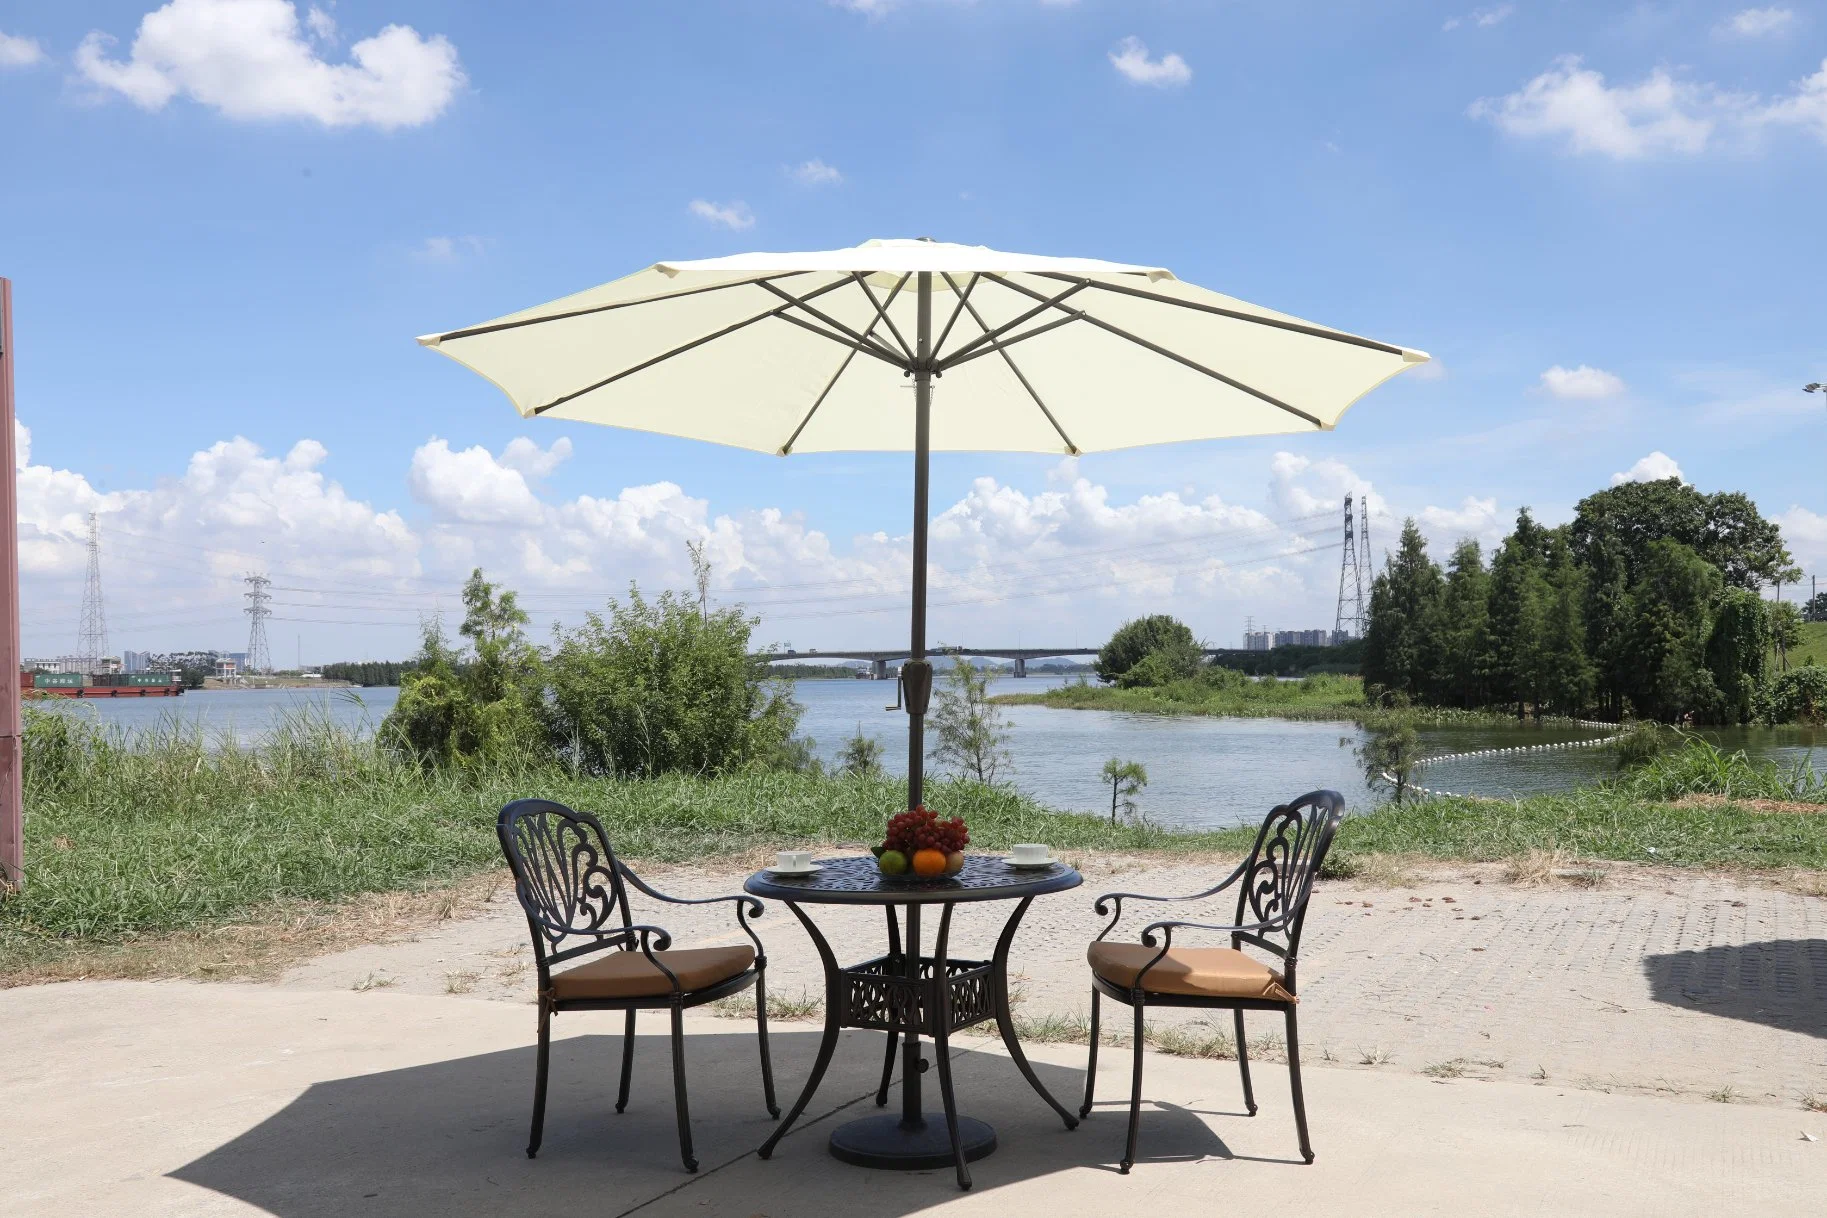 Outdoor Dining Sets with Cantilever Sale Beach Umbrella Side Table Fringe The Range Patio Garden Parasol